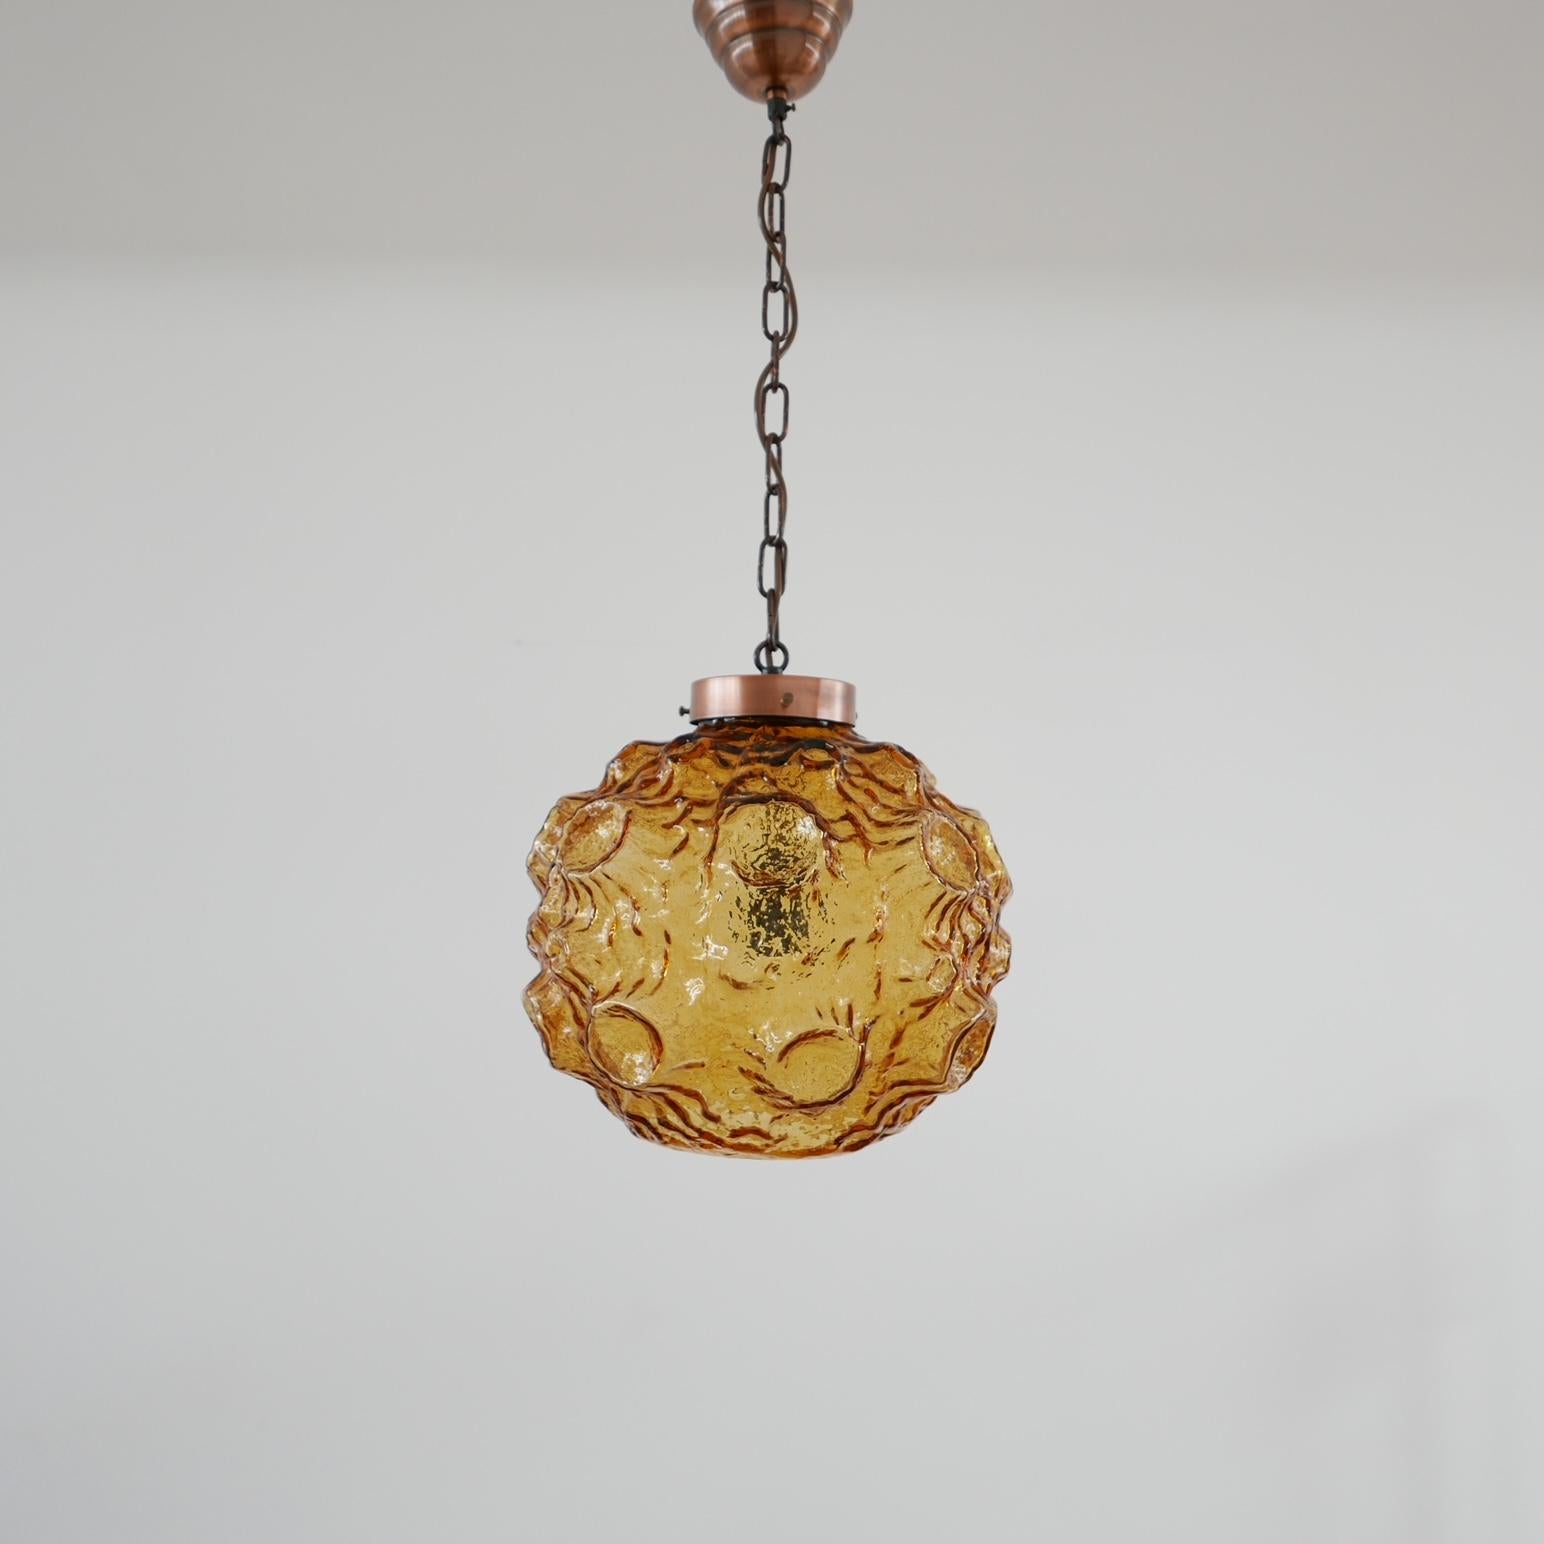 Danish Mid-Century Copper and Glass Pendant Light For Sale 3